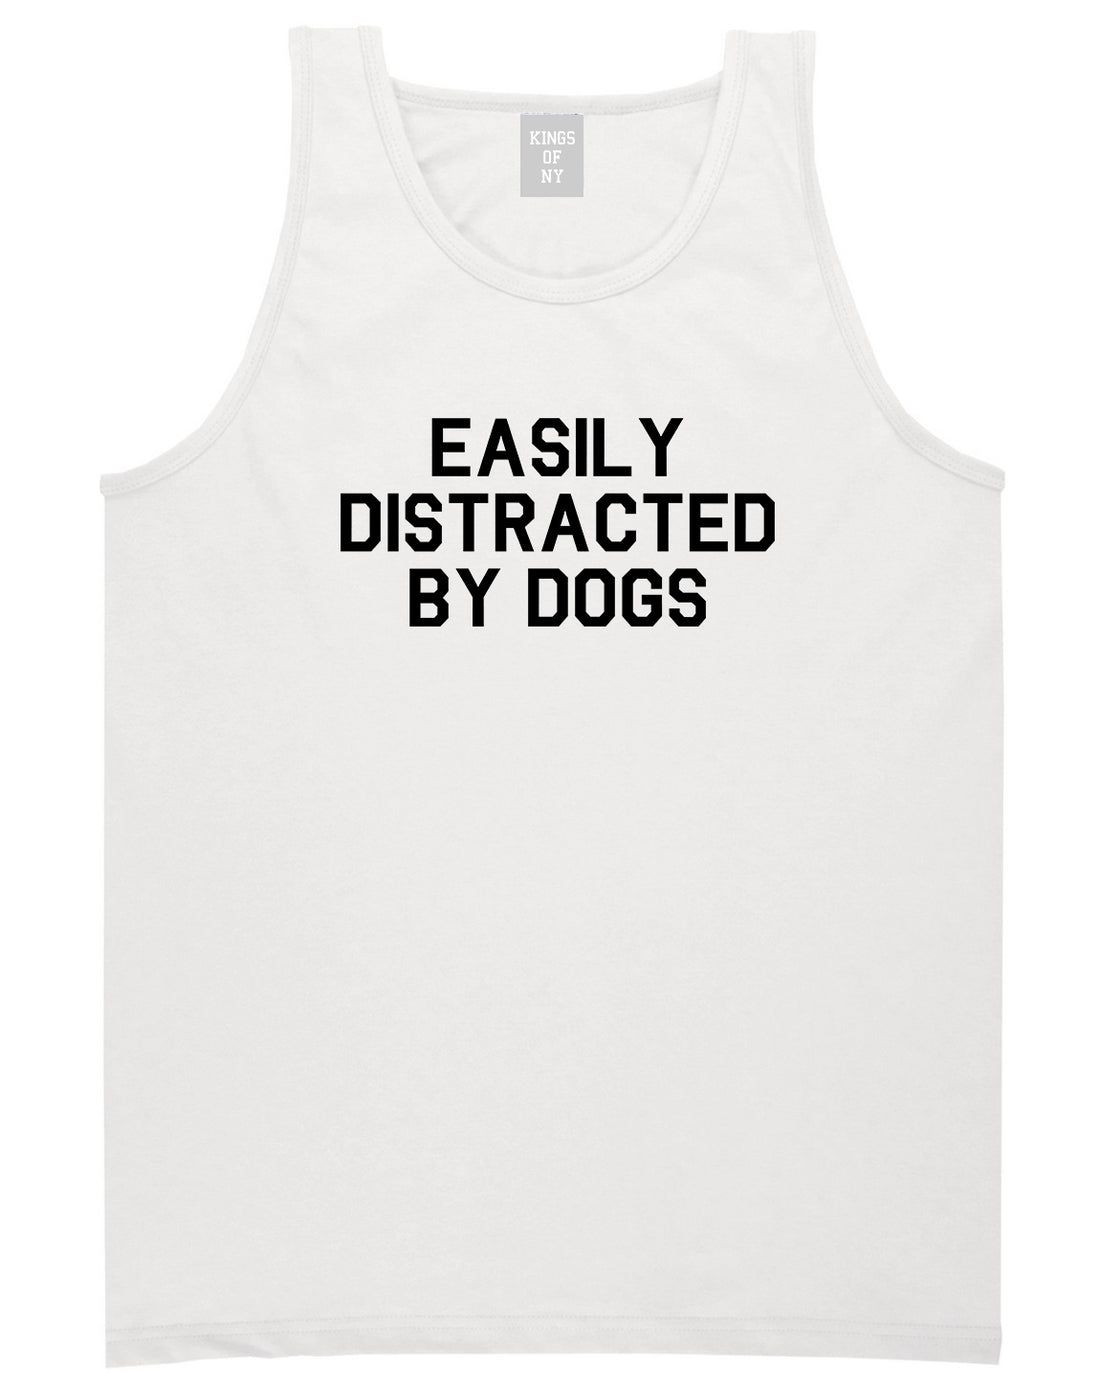 Easily Distracted By Dogs Mens Tank Top Shirt White